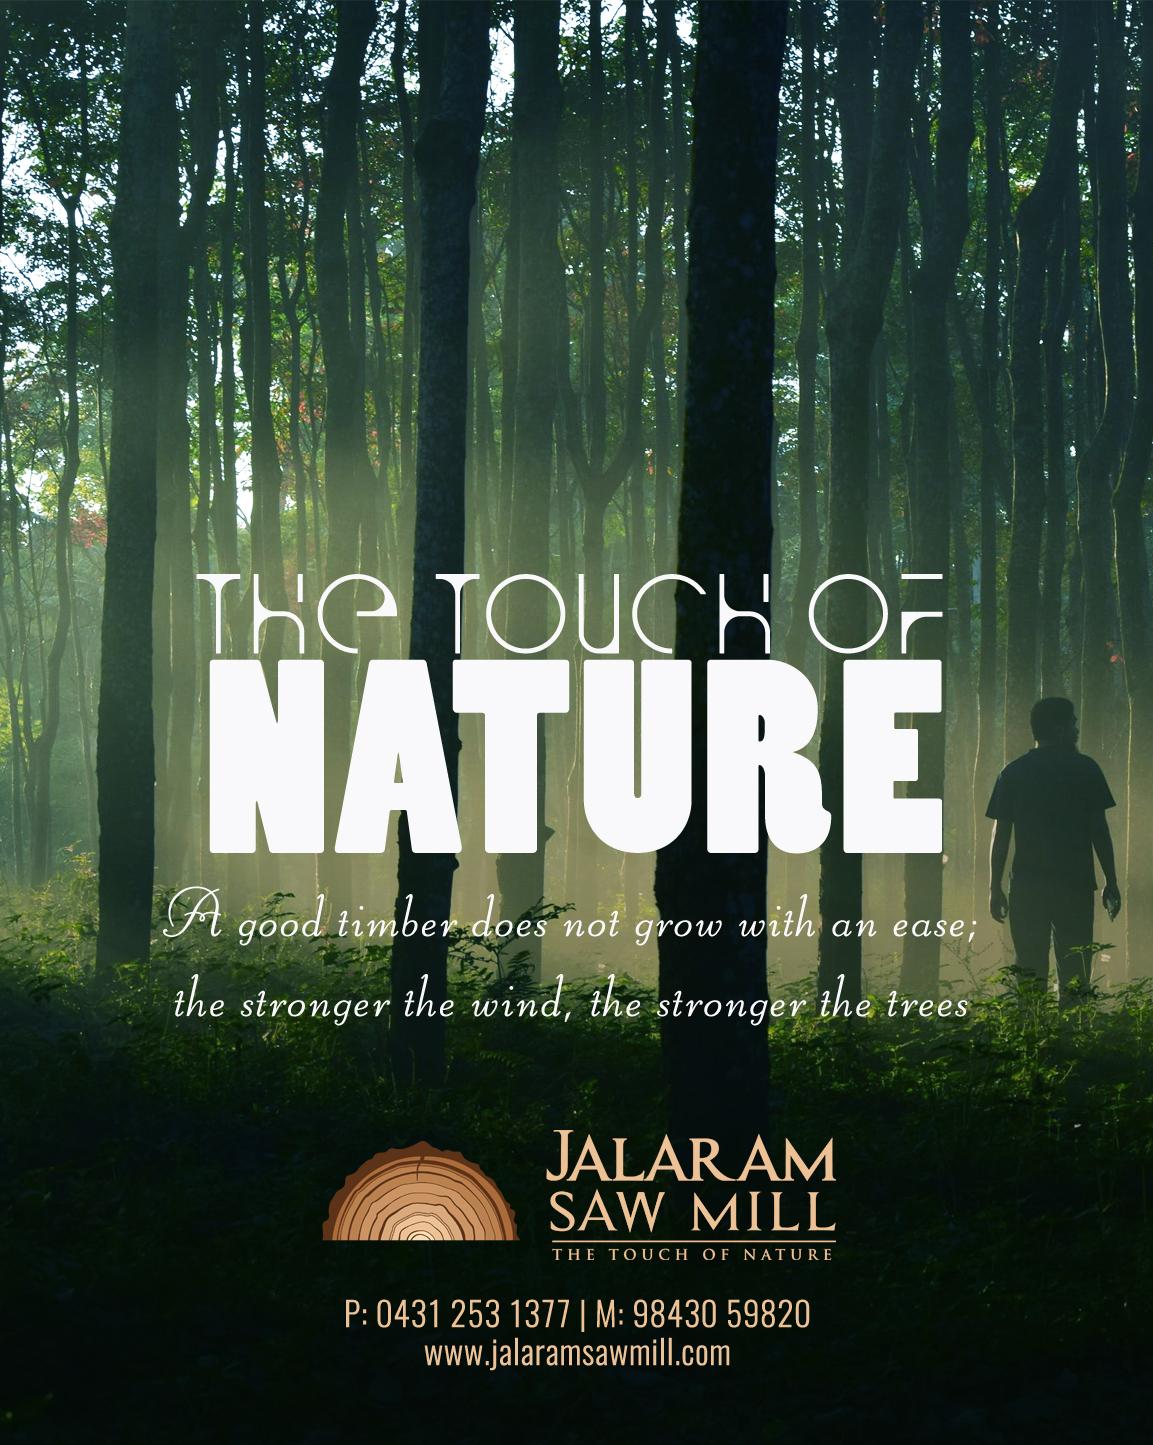 The touch of nature 